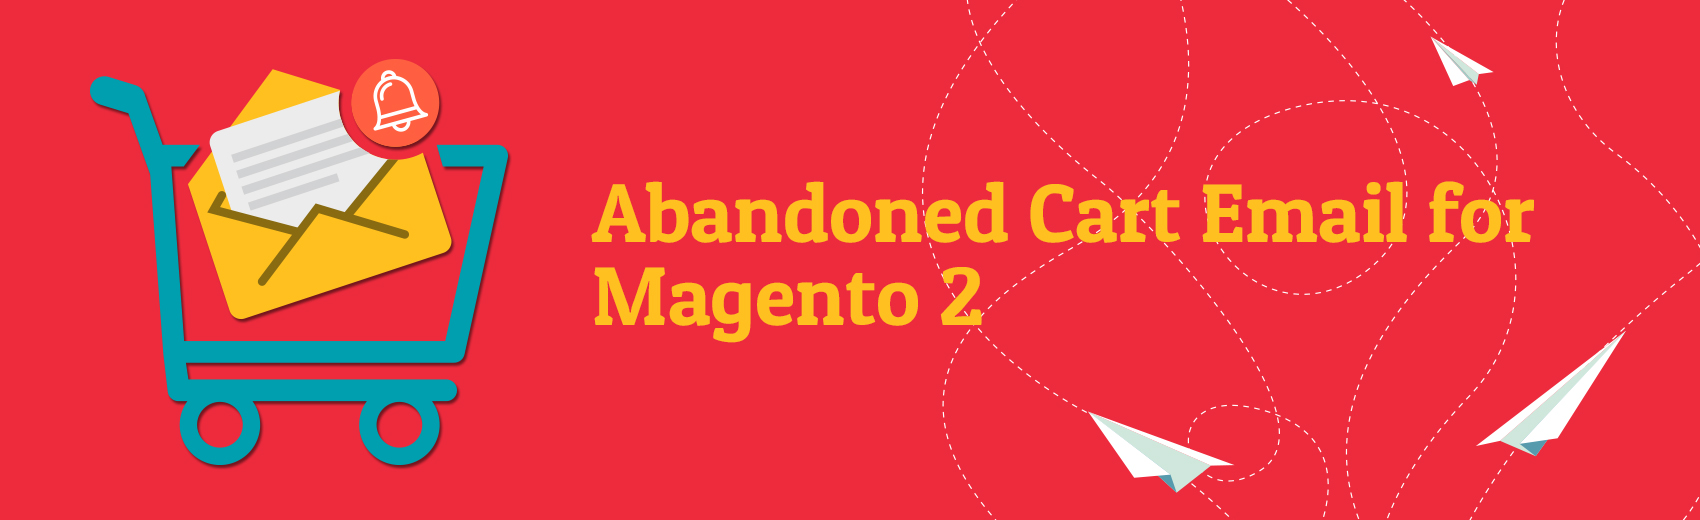 Magento-2-Abandoned-Cart-Email-Extension-blog-banner